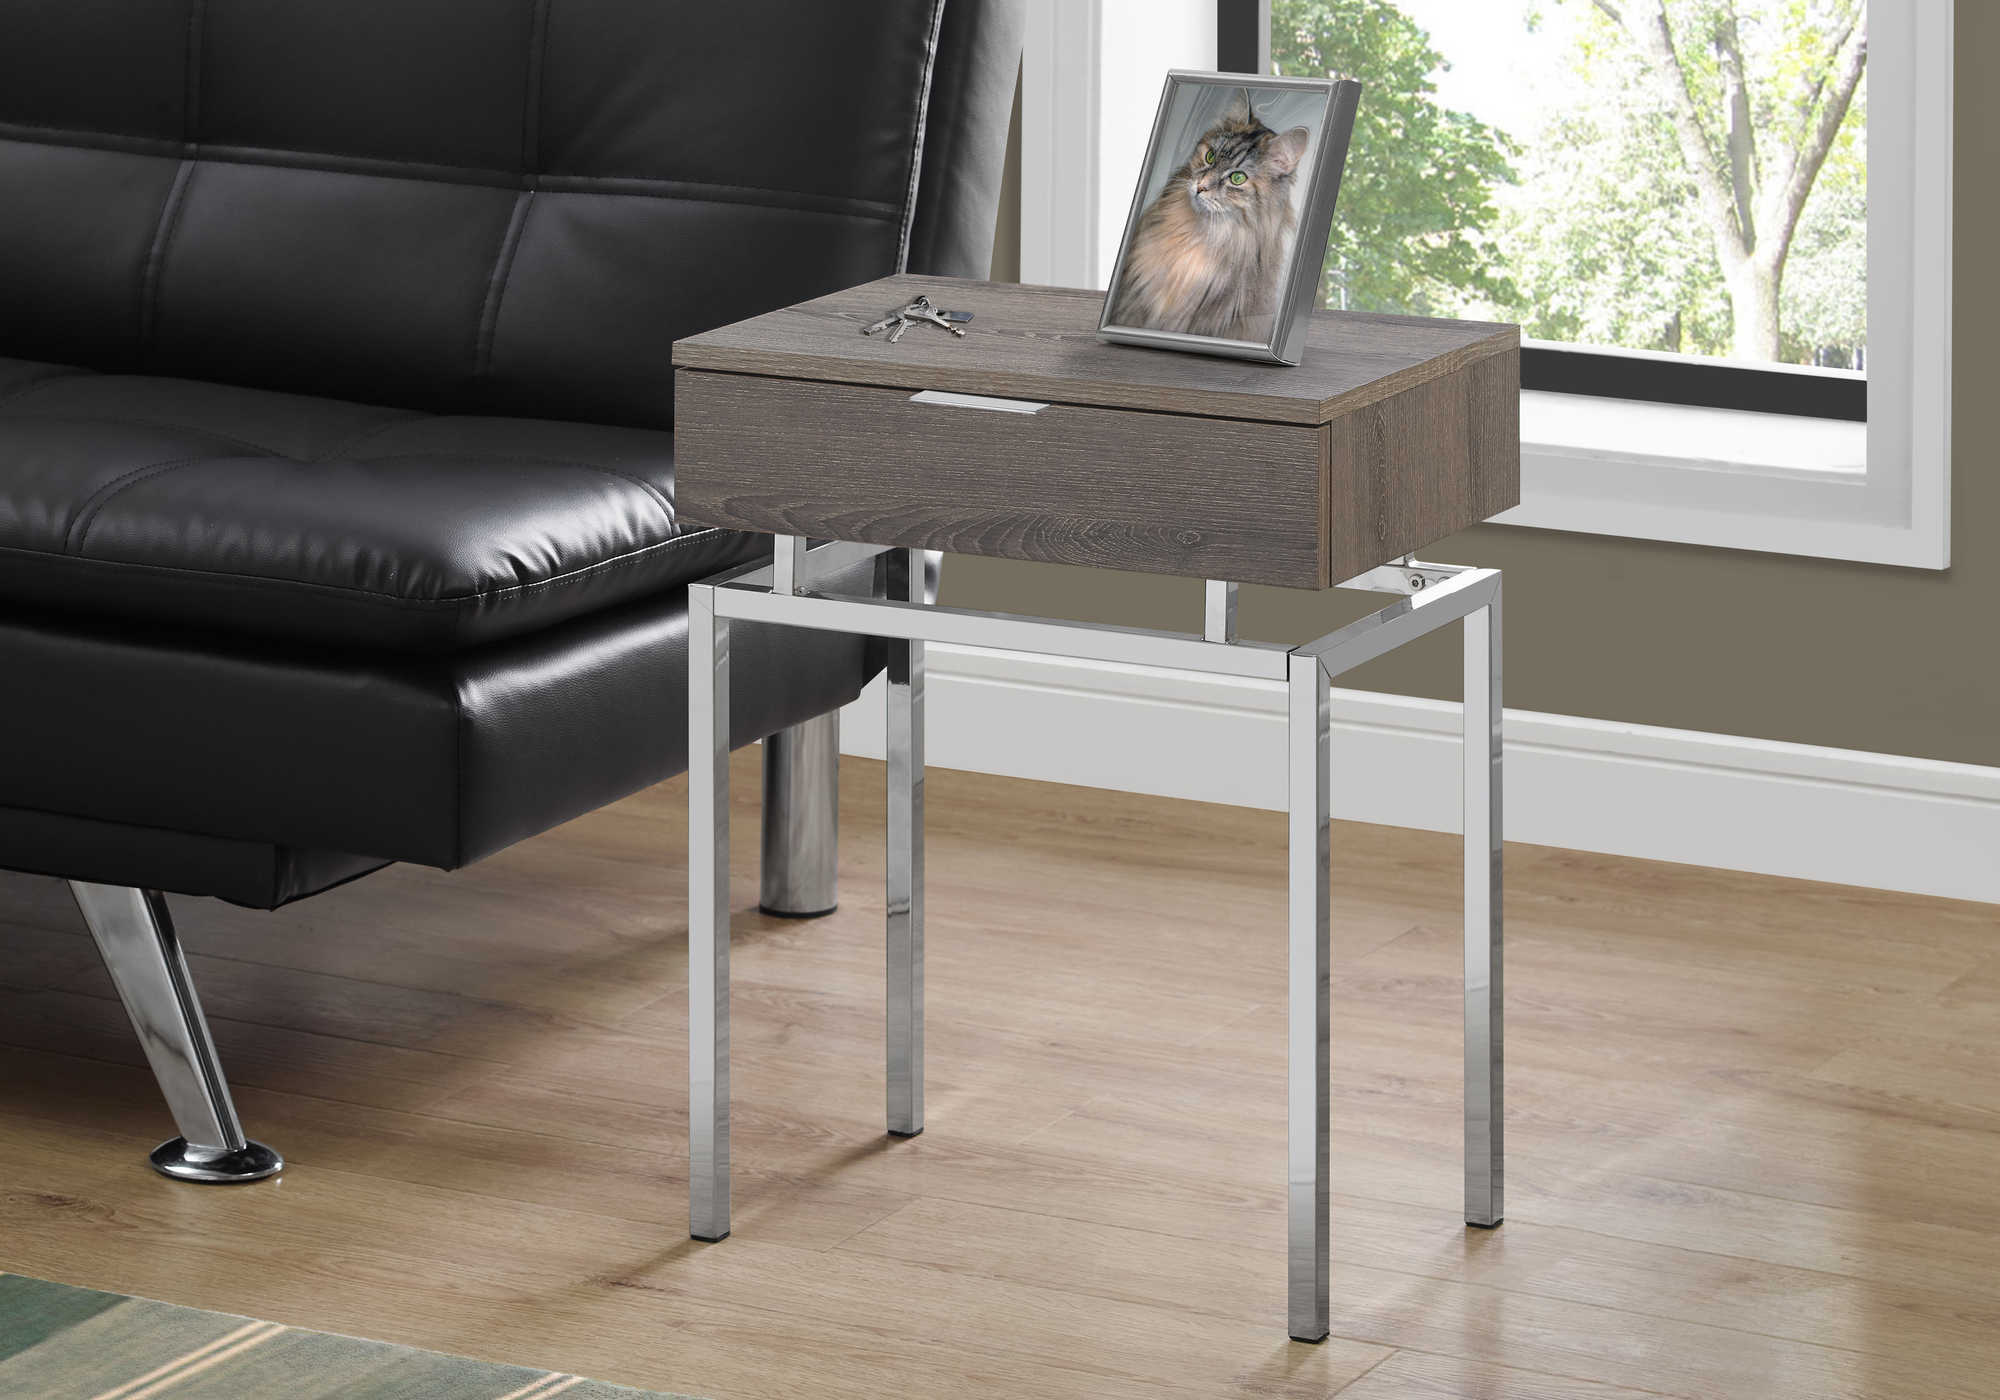 ACCENT TABLE - 24"H / DARK TAUPE / CHROME METAL